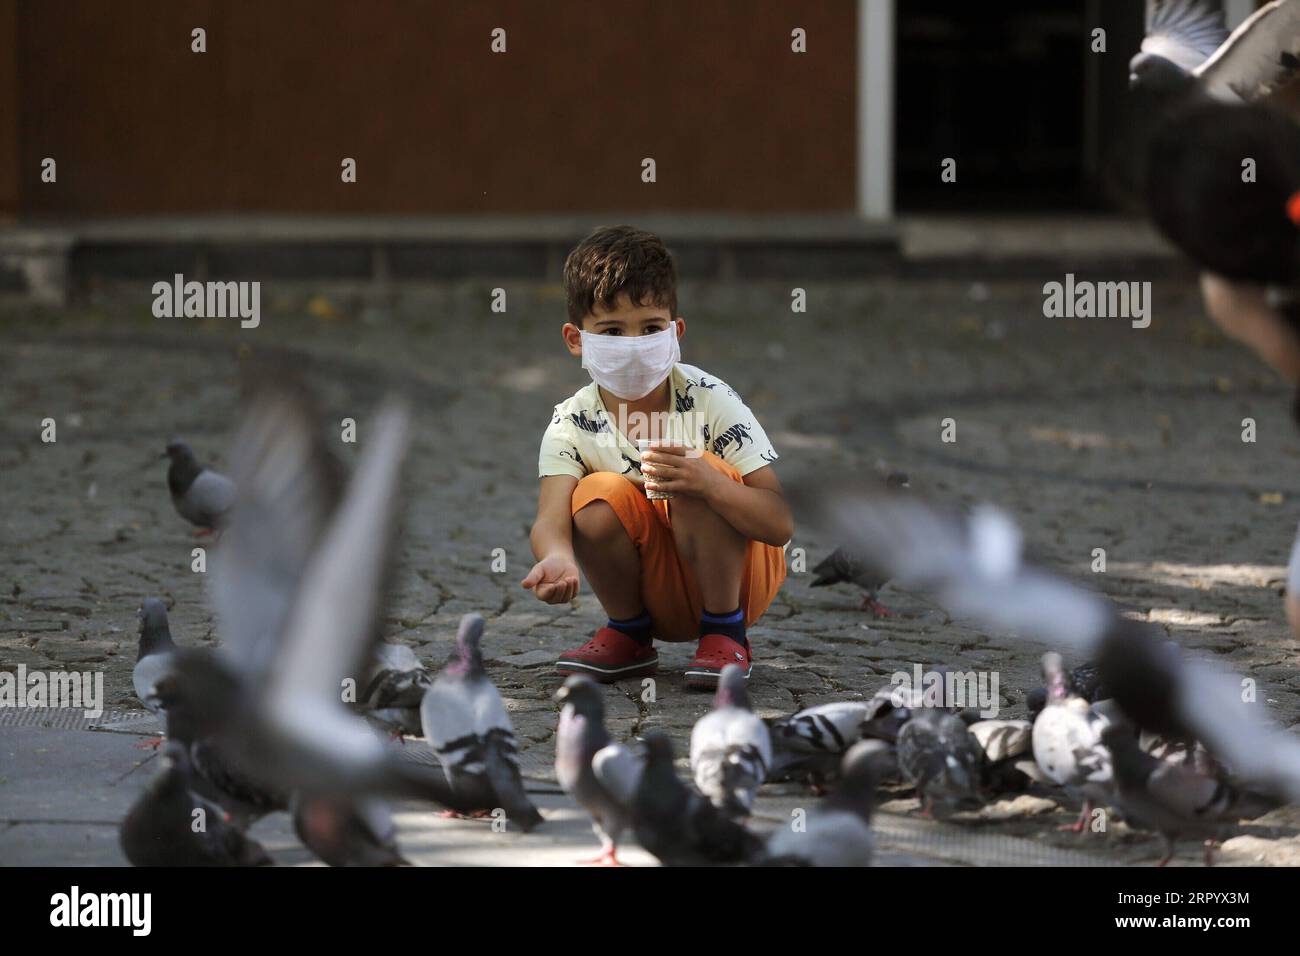 200717 -- ANKARA, July 17, 2020 -- A boy wearing a face mask feeds pigeons at a park in Ankara, Turkey, on July 17, 2020. Turkish Health Minister Fahrettin Koca on Friday warned of the increasing number of intensive care and intubated COVID-19 patients in the country. Turkey s daily coronavirus cases increased by 926 on Friday, raising the overall number to 217,799, the minister said. Photo by /Xinhua TURKEY-ANKARA-COVID-19-CASES MustafaxKaya PUBLICATIONxNOTxINxCHN Stock Photo